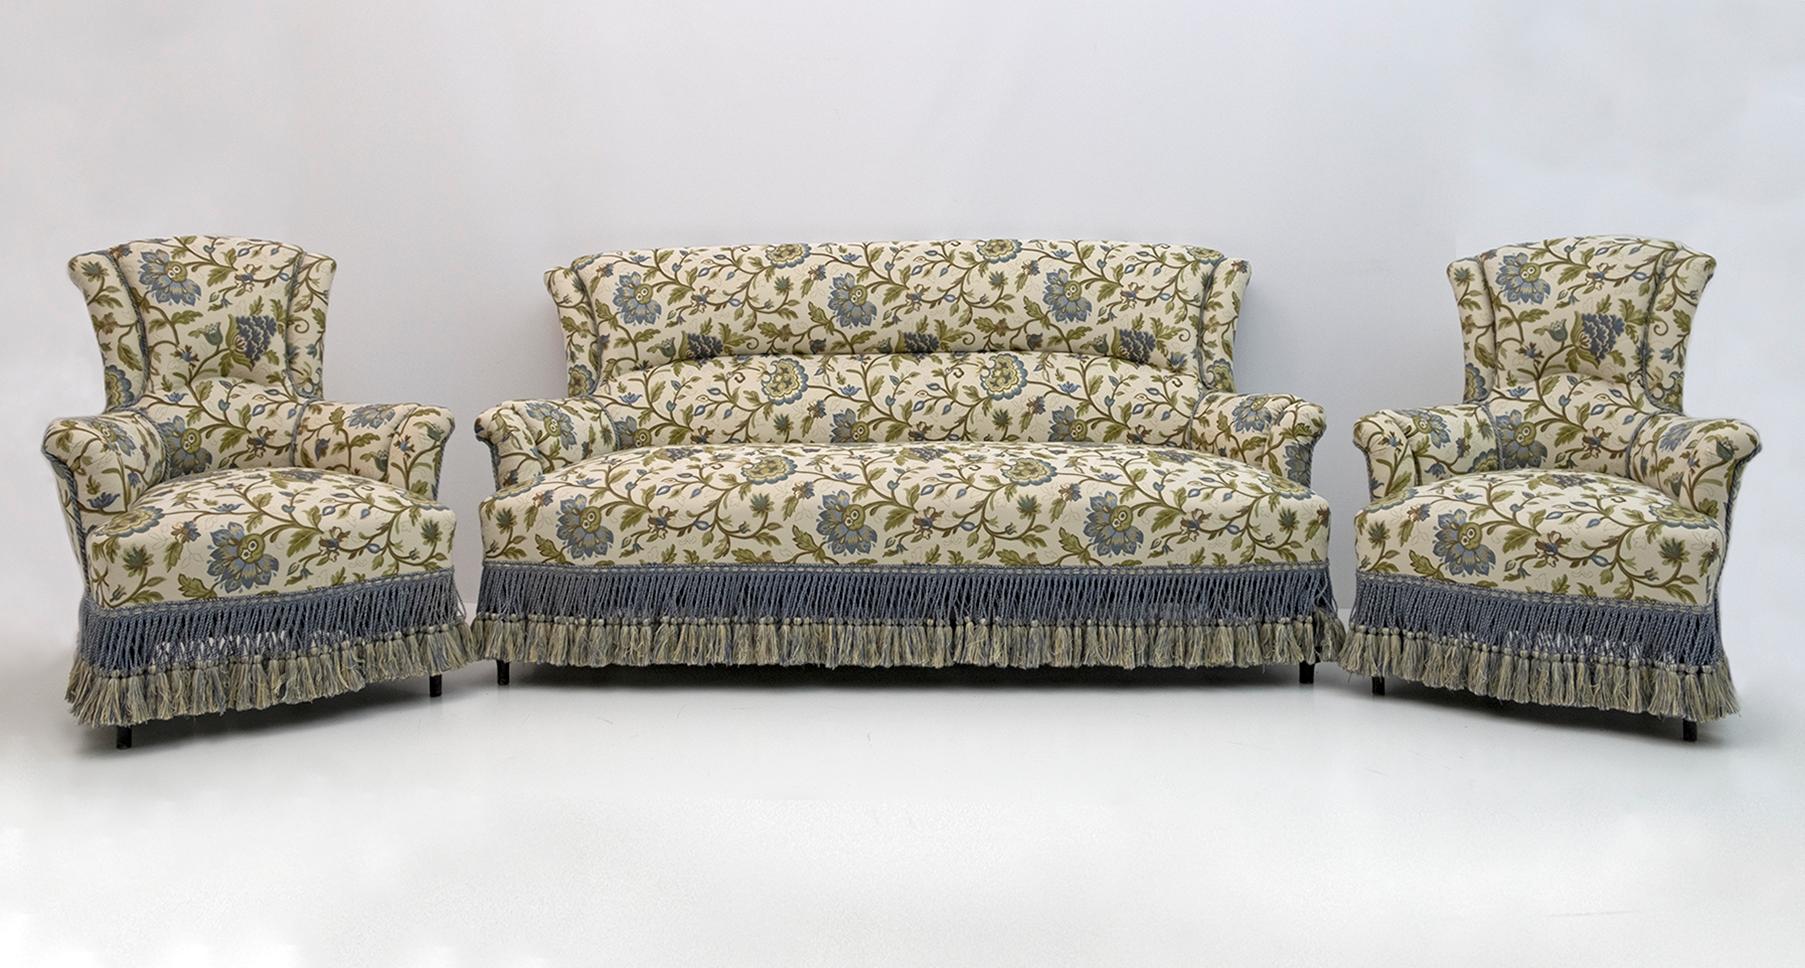 French sofa and two armchairs from the 19th century, Napoleon III period. The whole set has been restored and the upholstery replaced with a beautiful Italian Brocade. France, 1870.
The armchairs measure cm:
W73 x D72 x H89 x S42